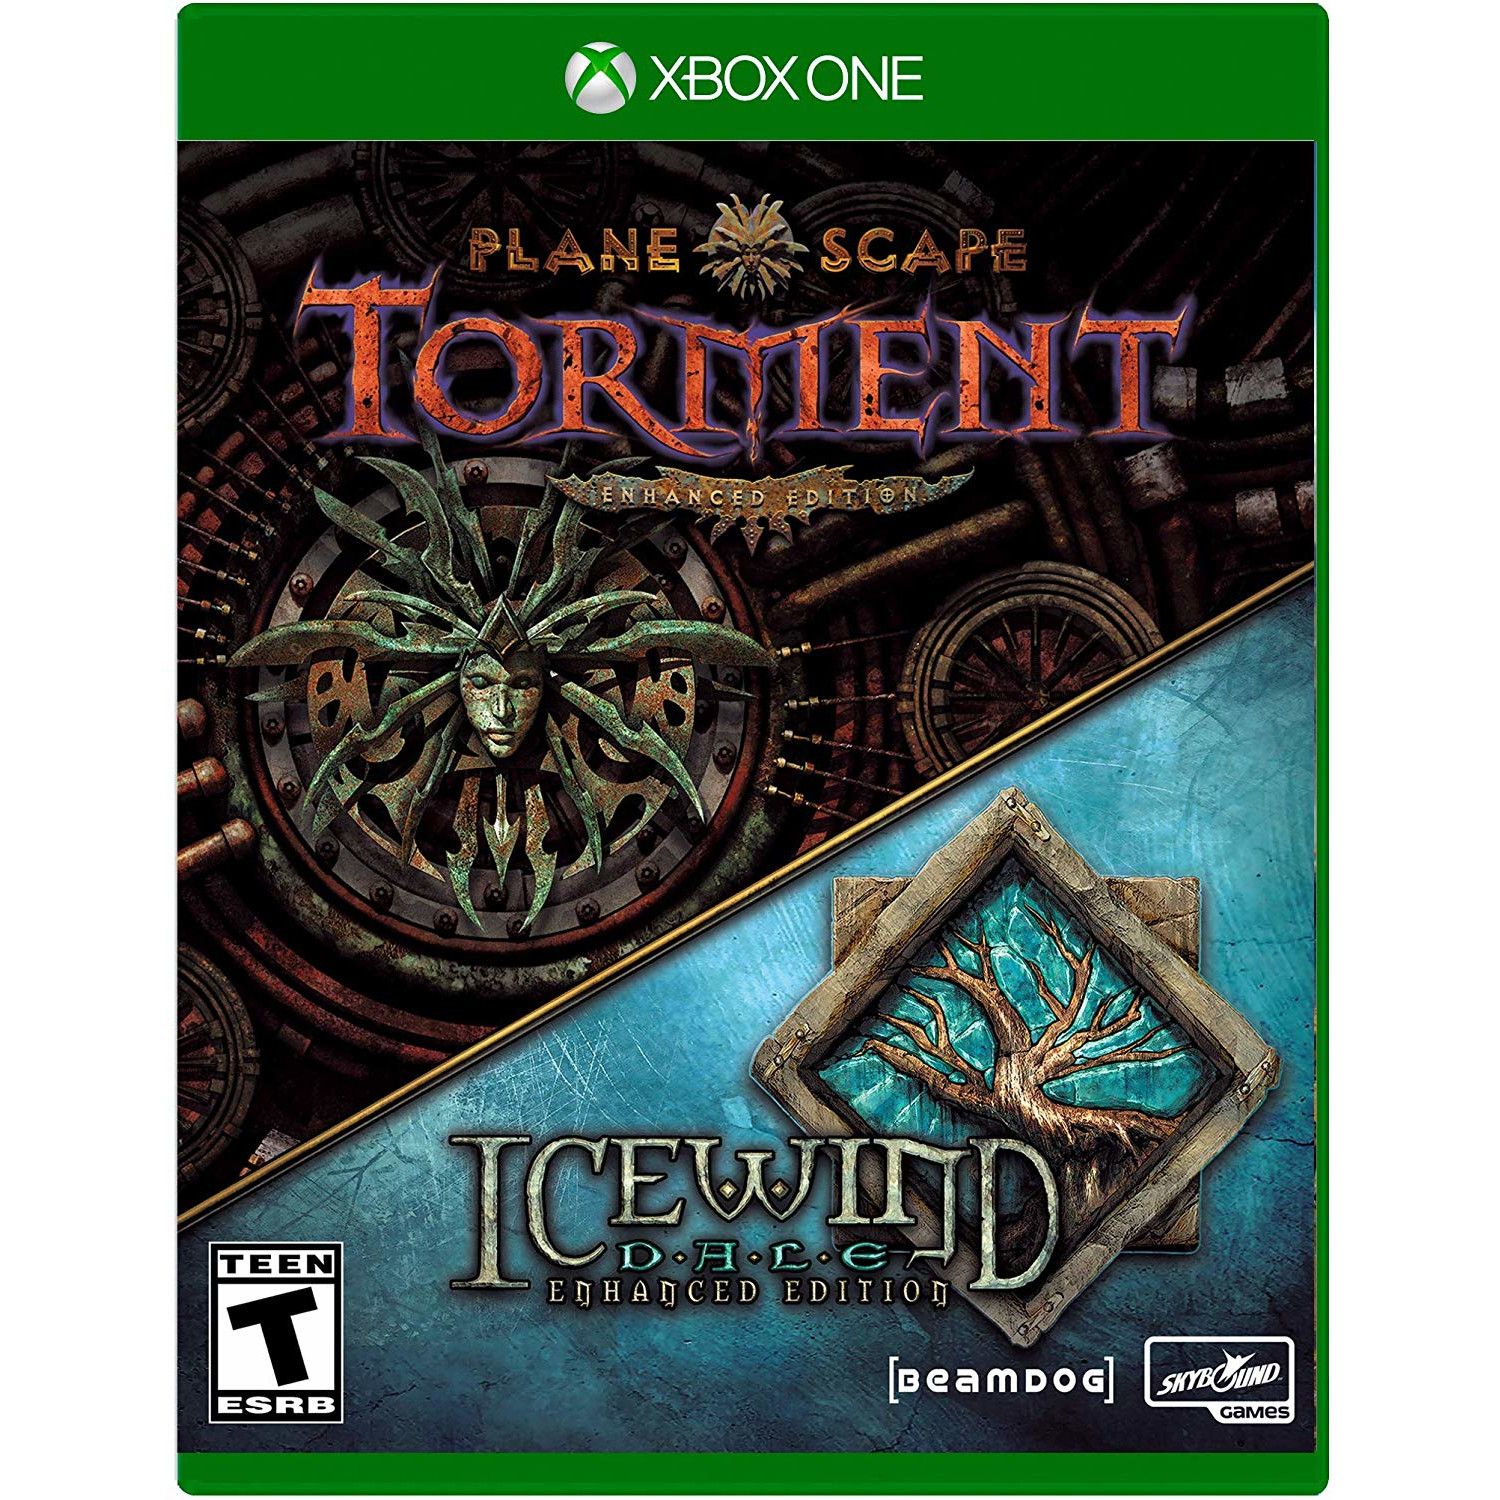 Planescape Torment & Icewind Dale Pack - Xbox One